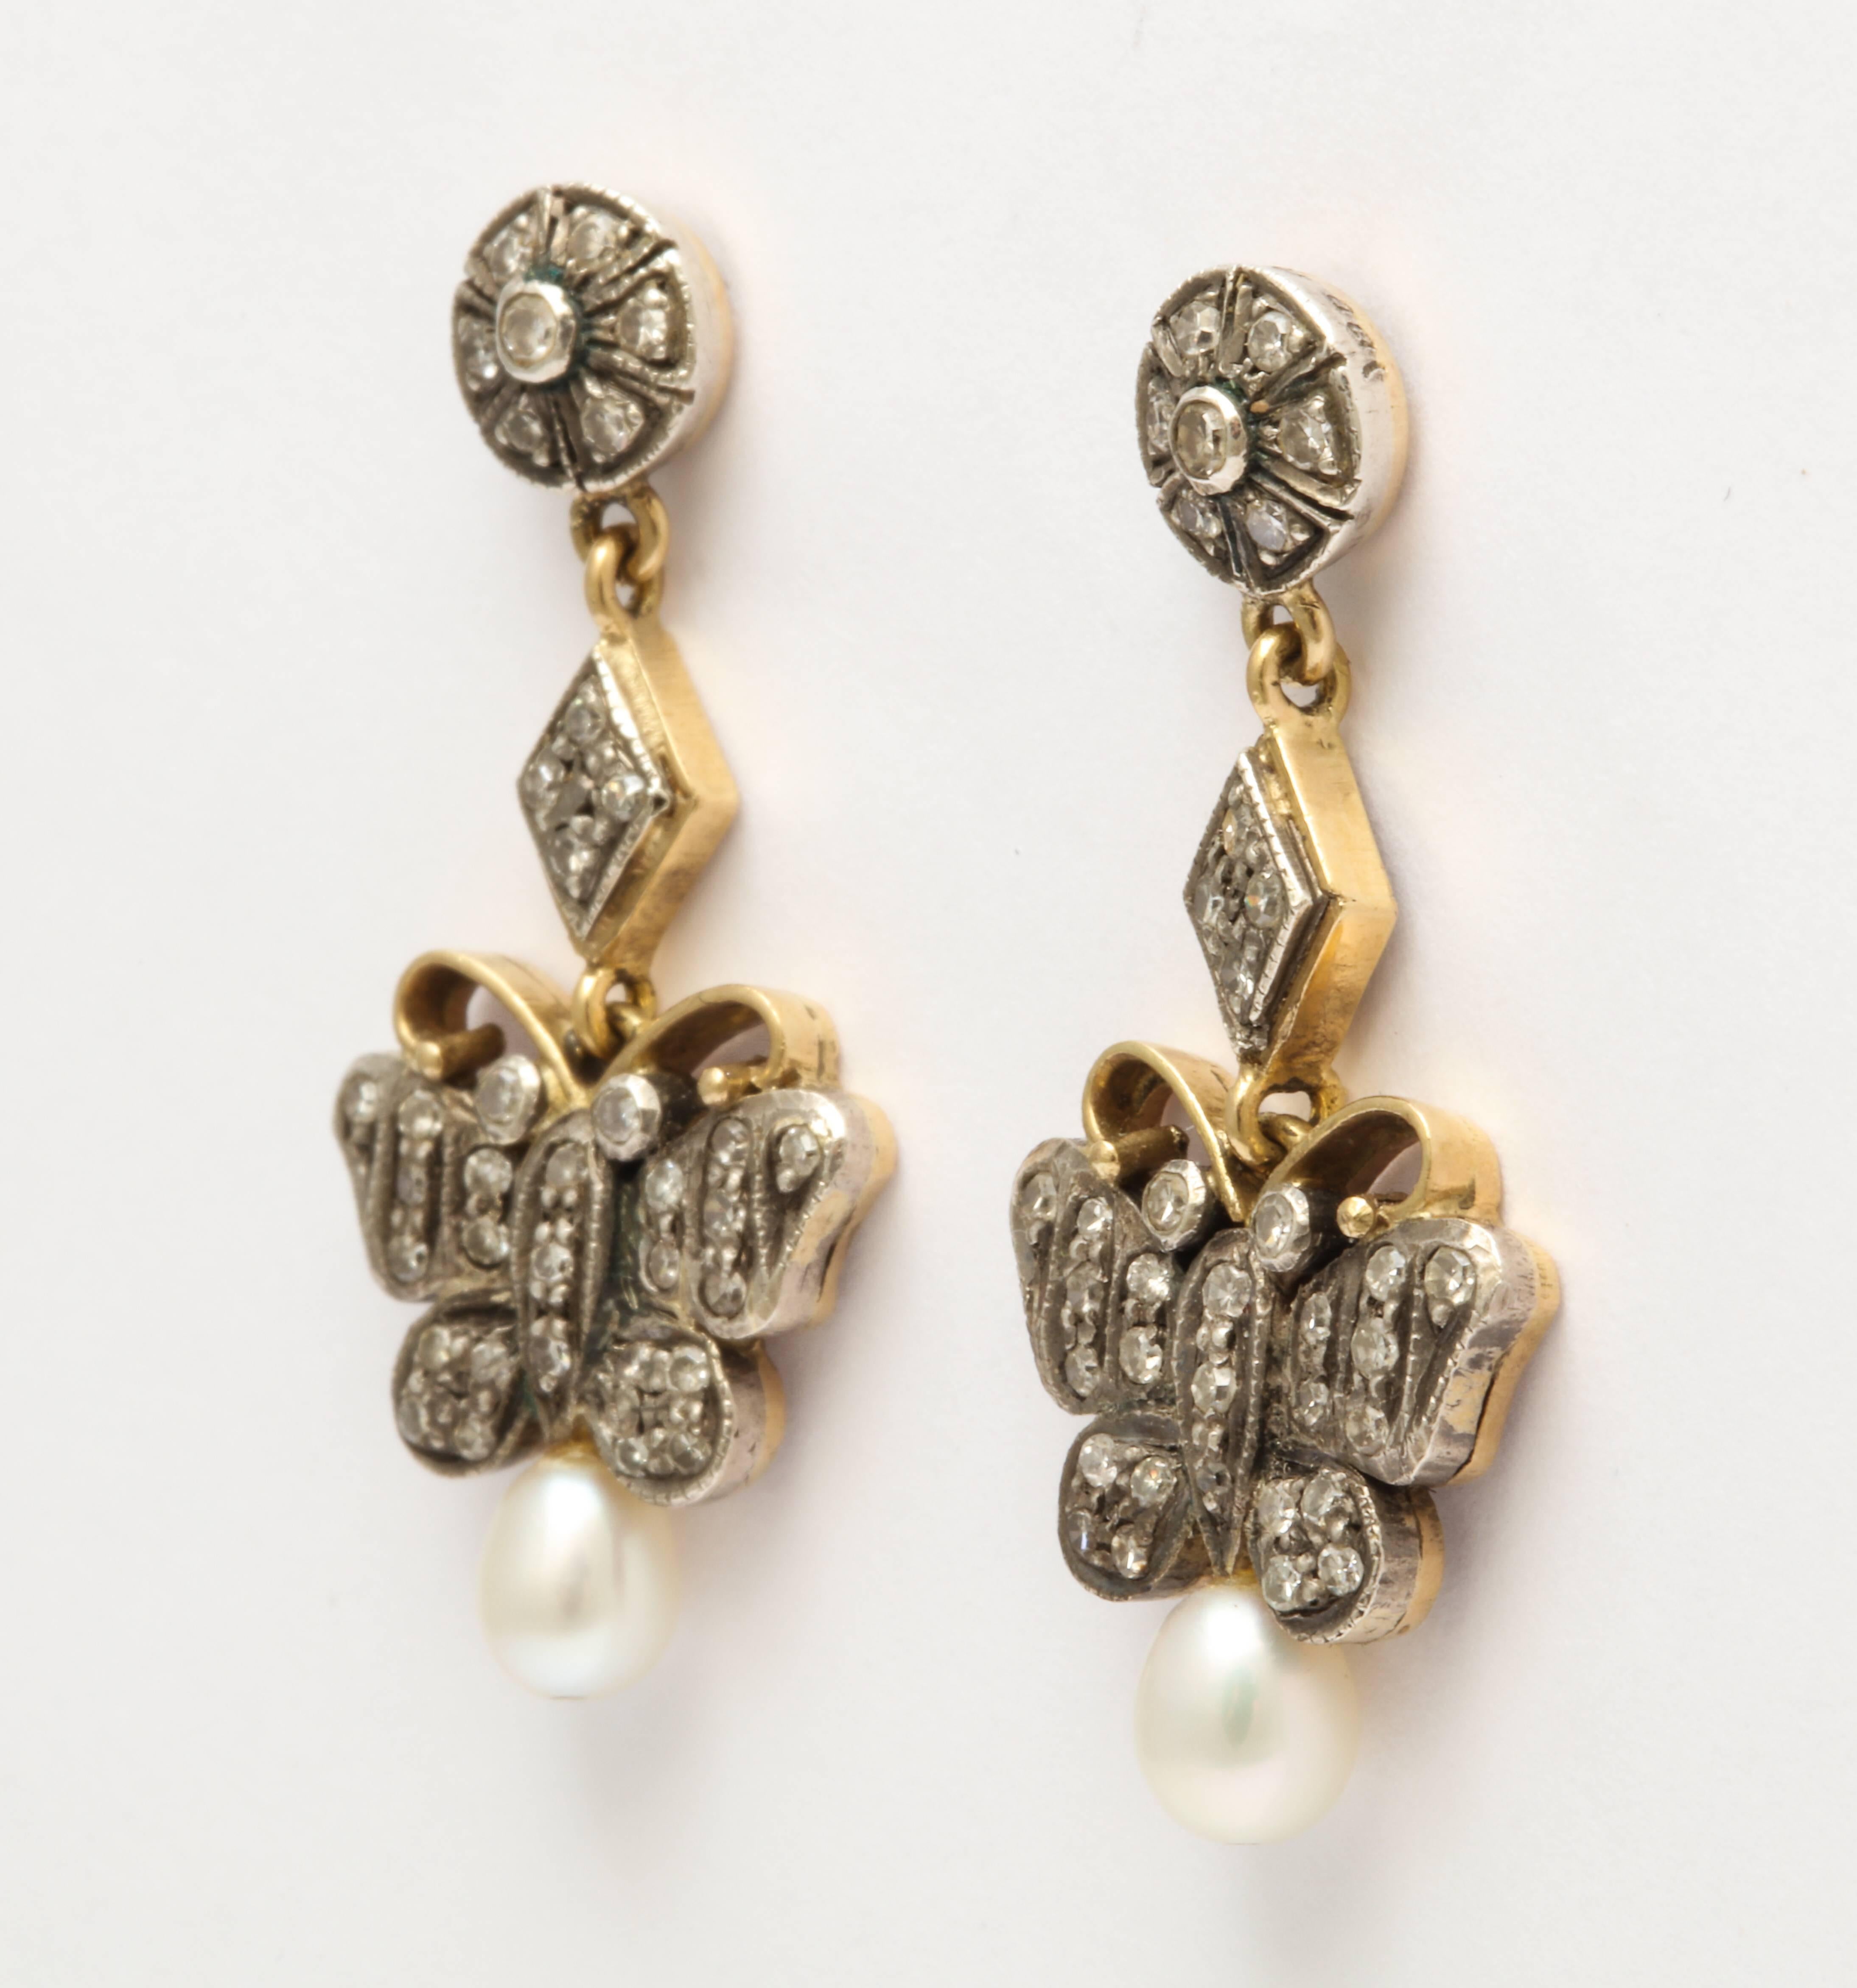 A fabulous pair of Edwardian antique diamond and pearl earrings in a great butterfly form  in 14 kt gold topped with silver.